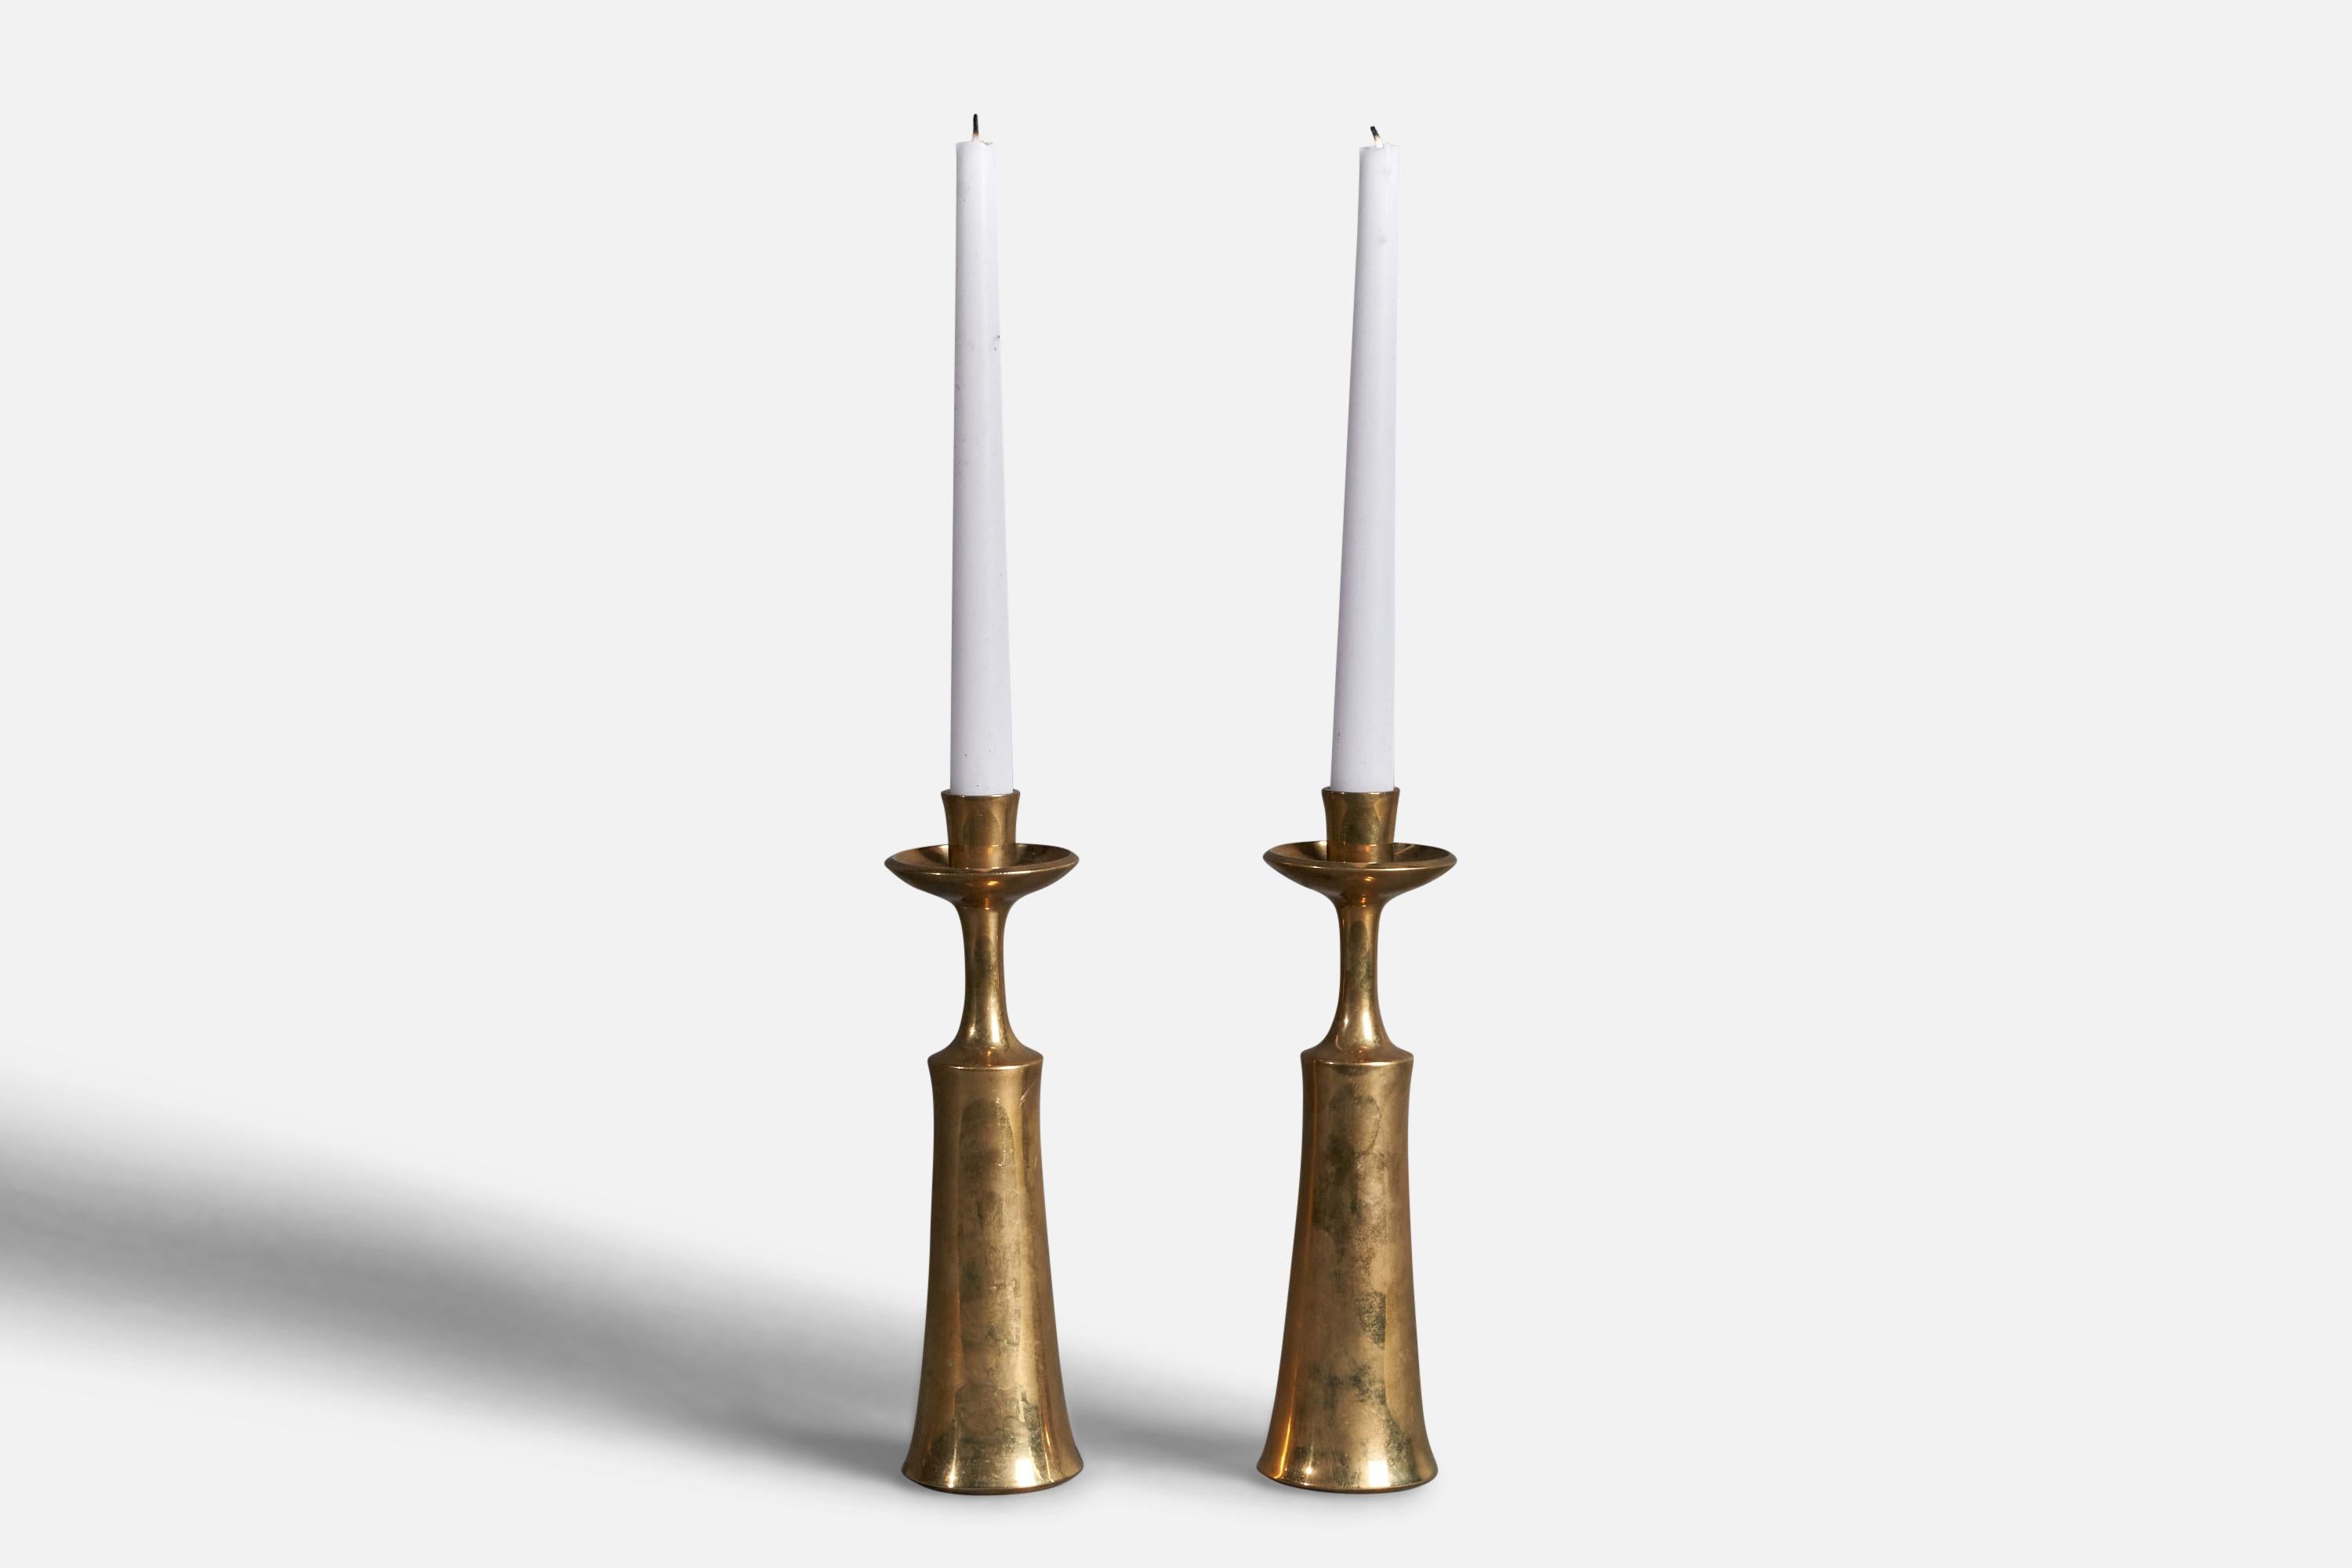 A pair of brass candlesticks designed by Jens Quistgaard and produced by Dansk Designs, Denmark, c. 1950s.